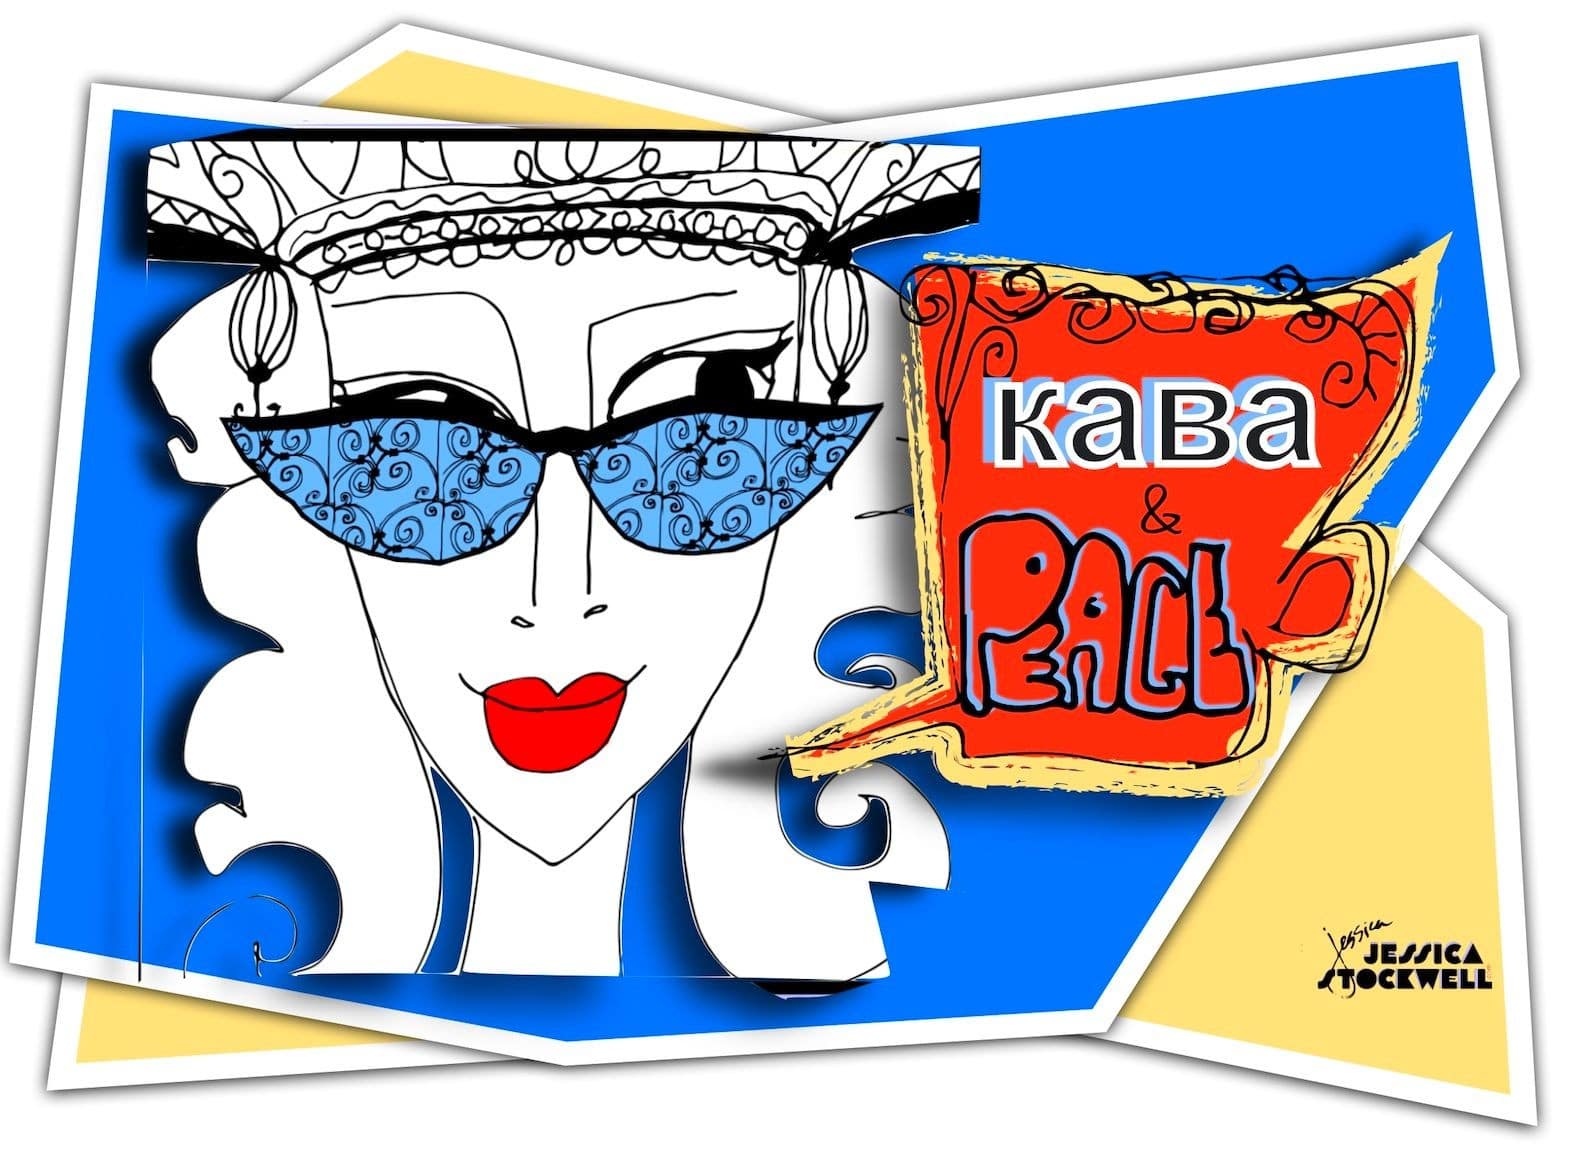 POP QUEENS for PEACE Collection 2o24  - ARTIST: Jessica Stockwell - POP QUEEN: The 2 Olenas - Title: KABA & PEACE